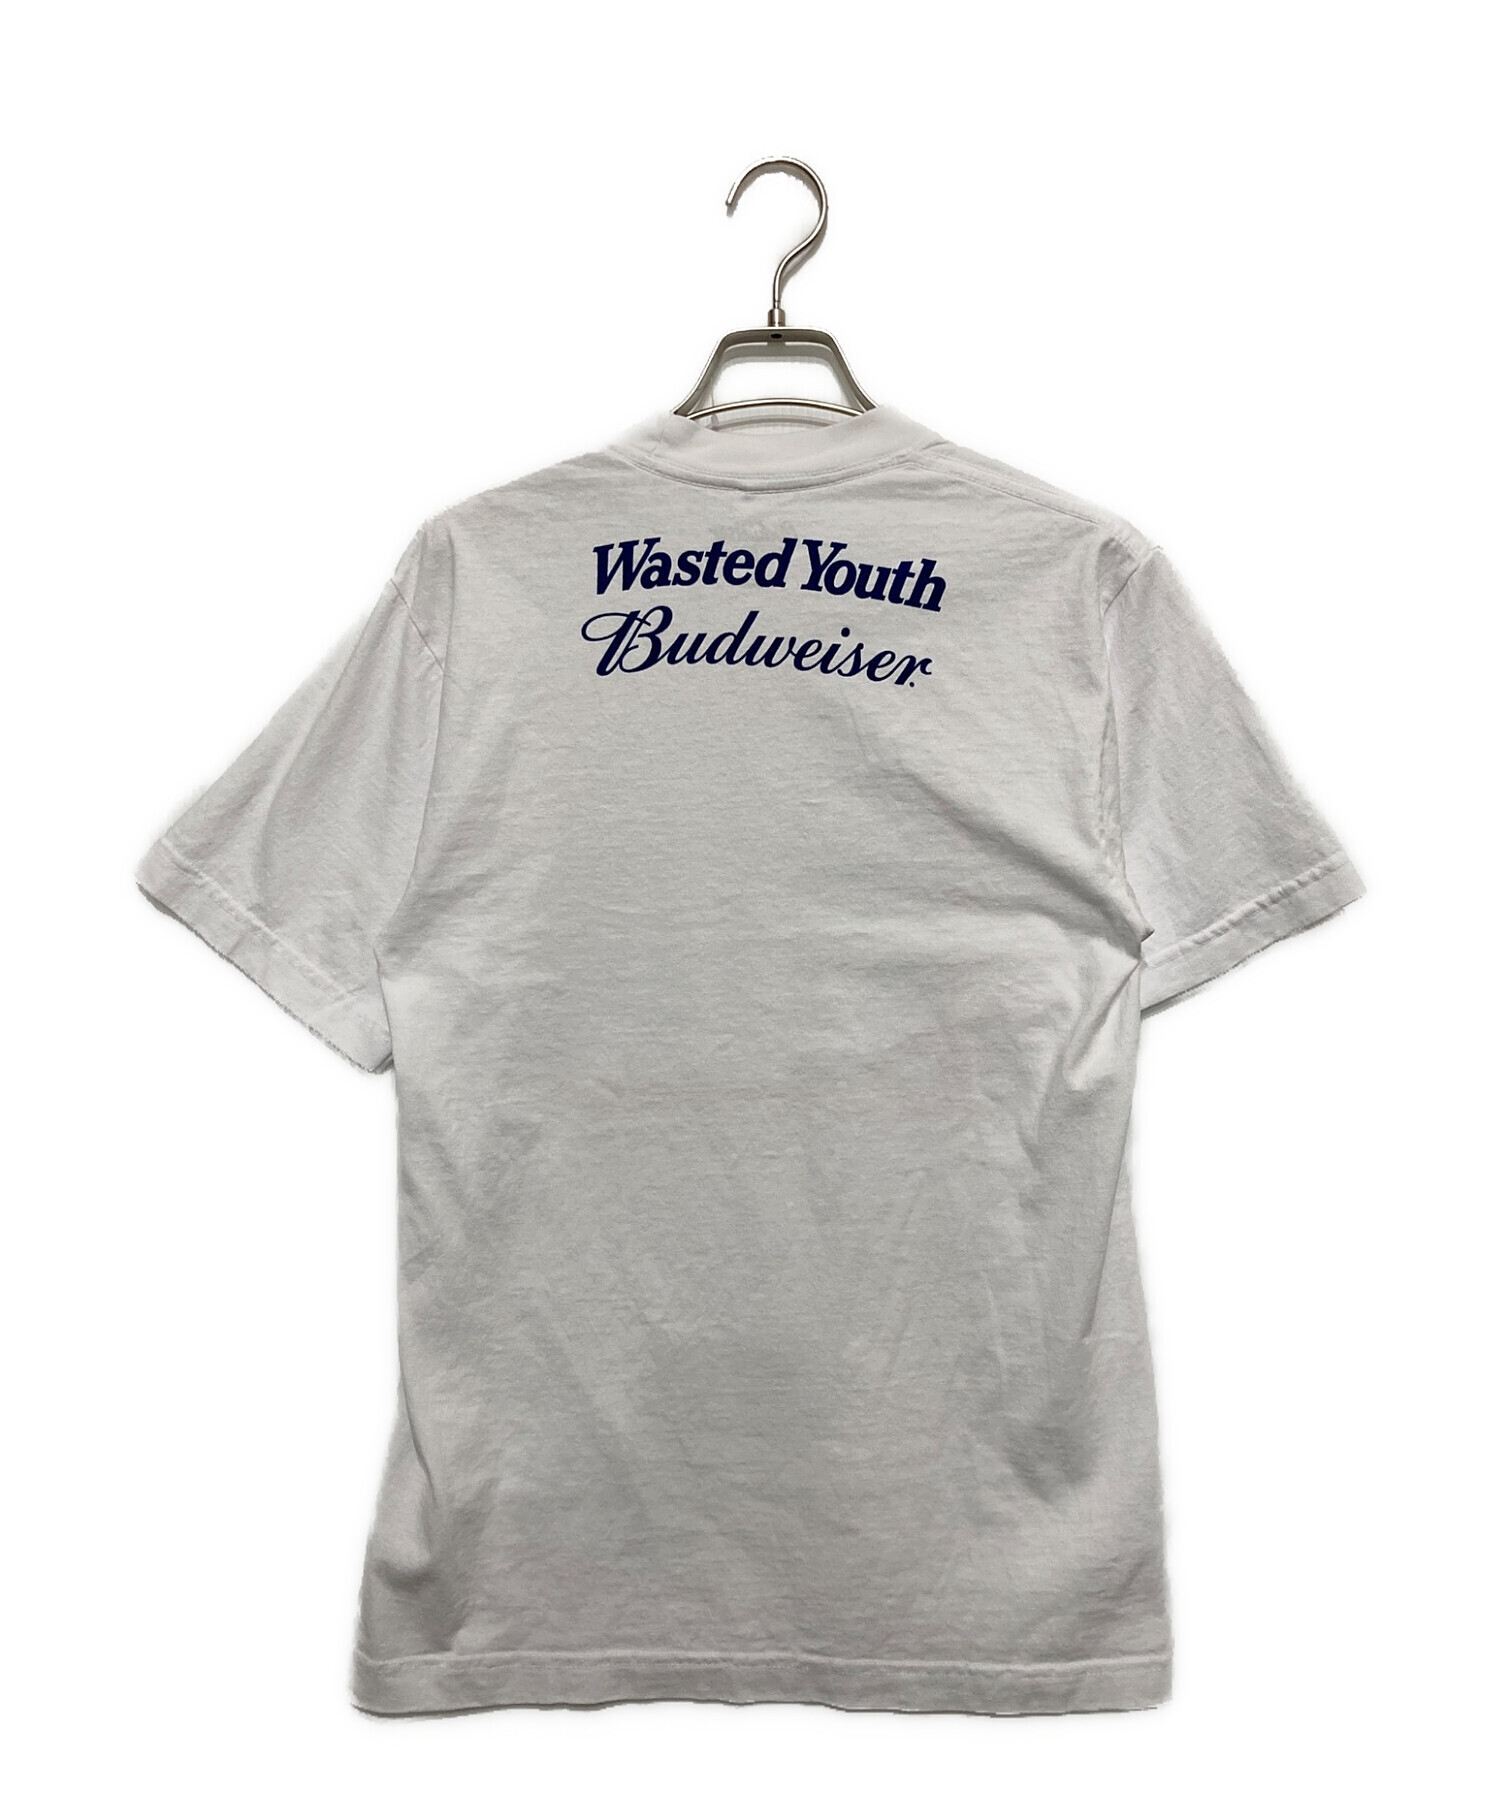 wasted youth tシャツ　budweiser 2種類　セットサイズXL